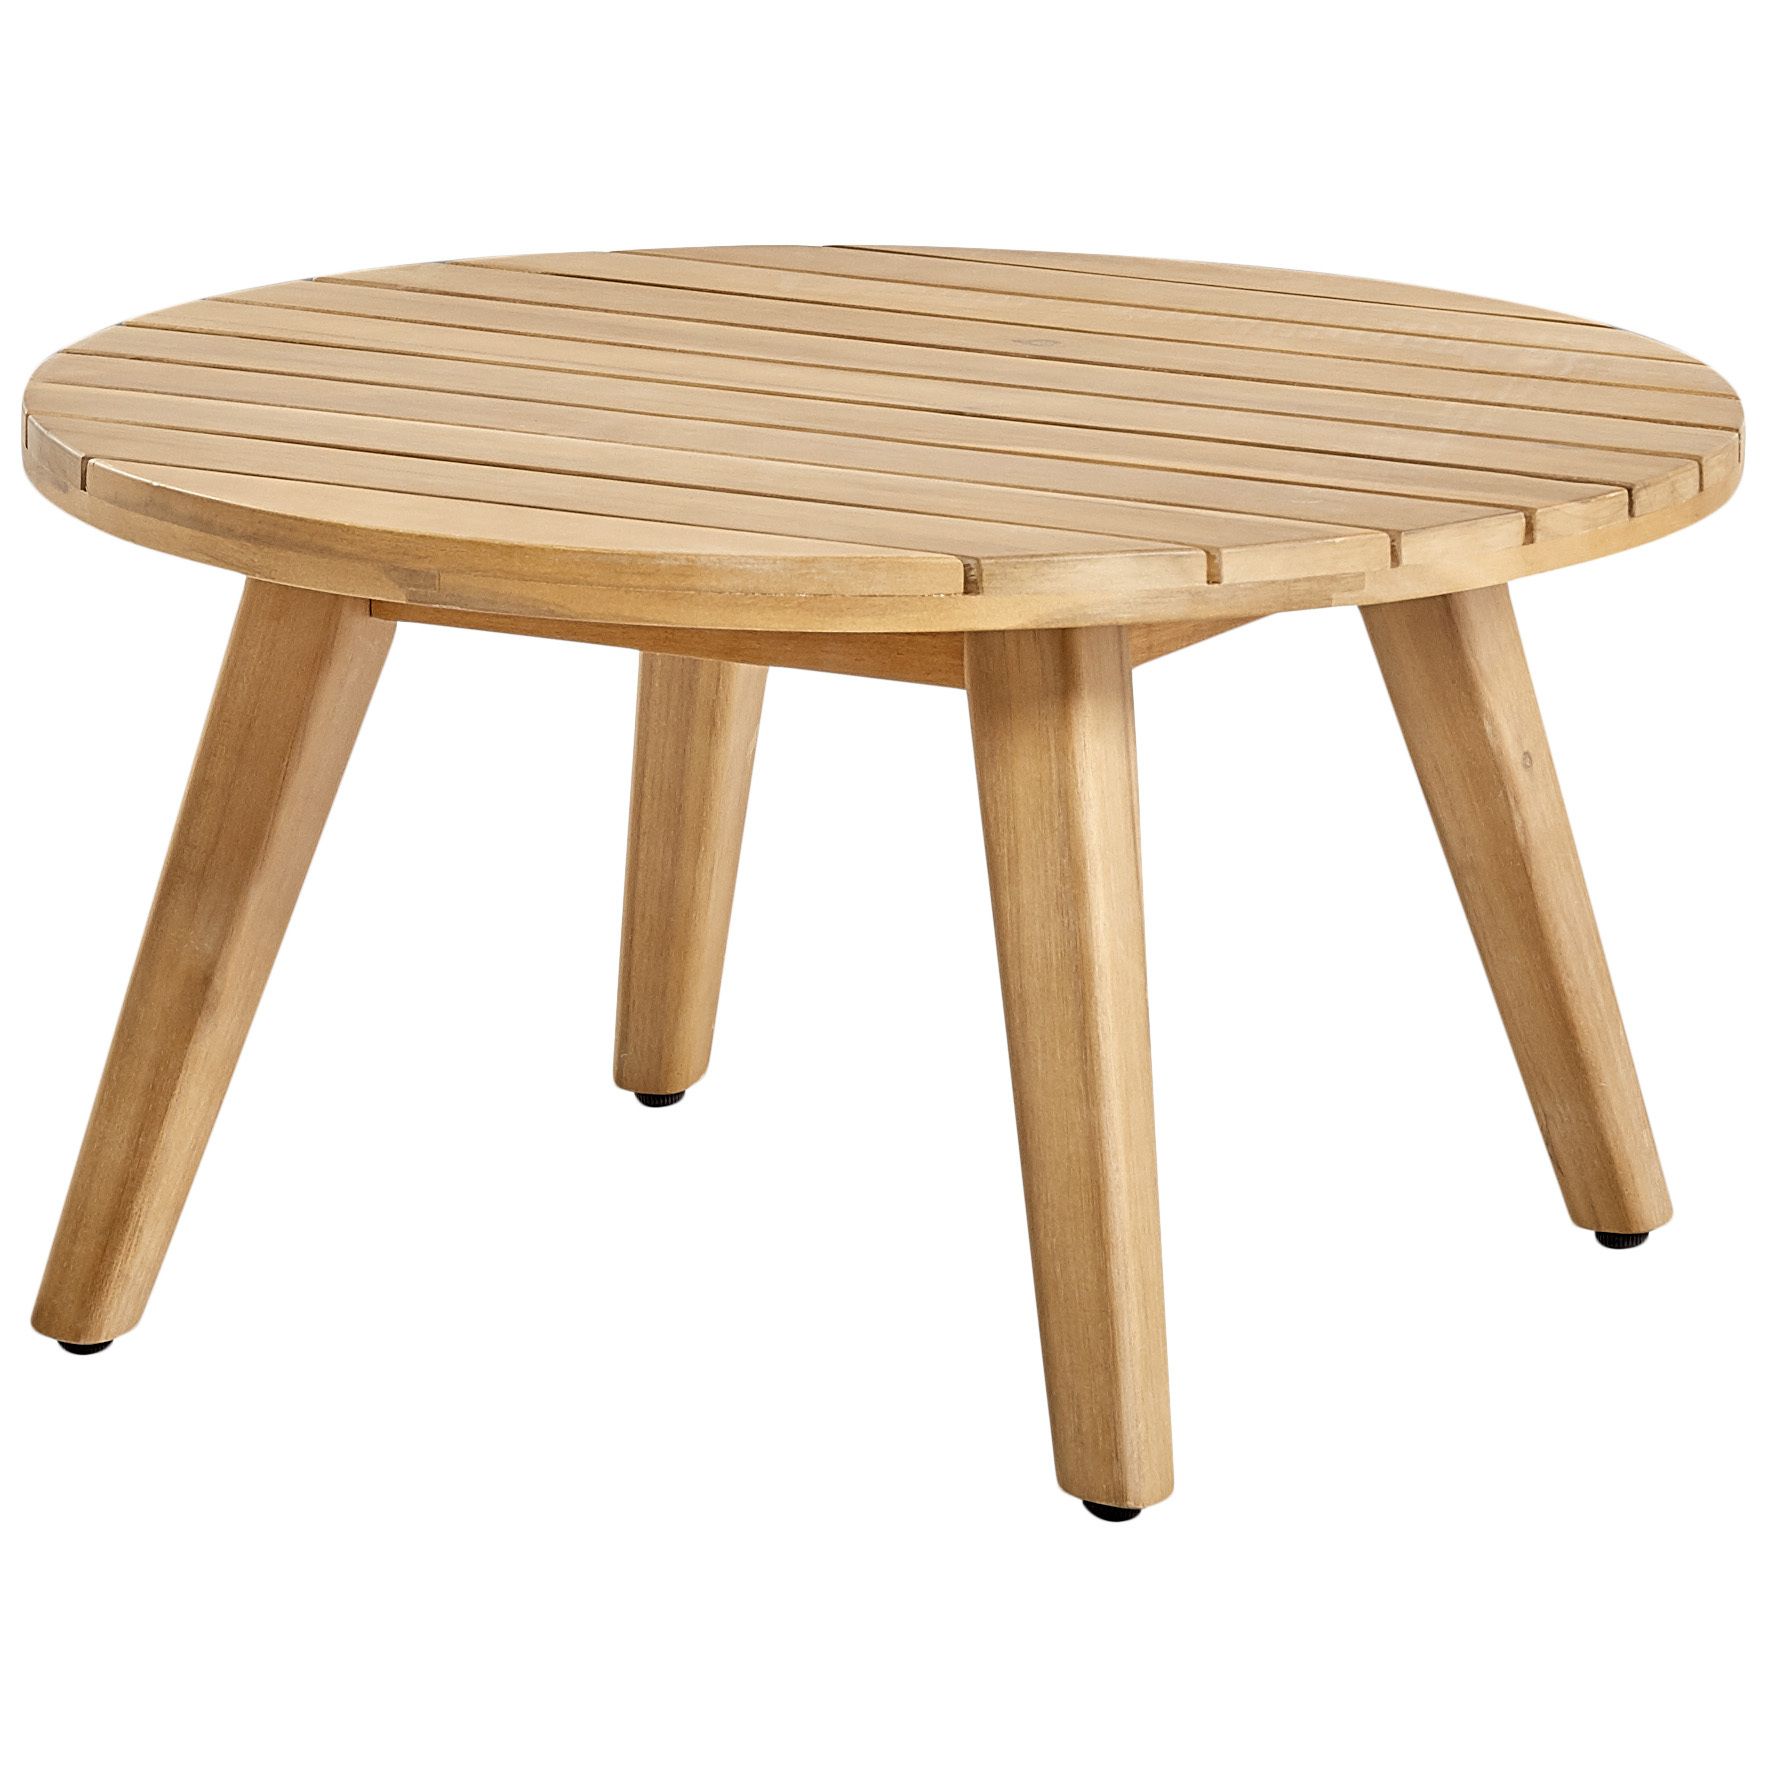 Well Known Temple & Webster Bay Acacia Wood Outdoor Coffee Table For Acacia Wood Outdoor Tables (View 3 of 15)